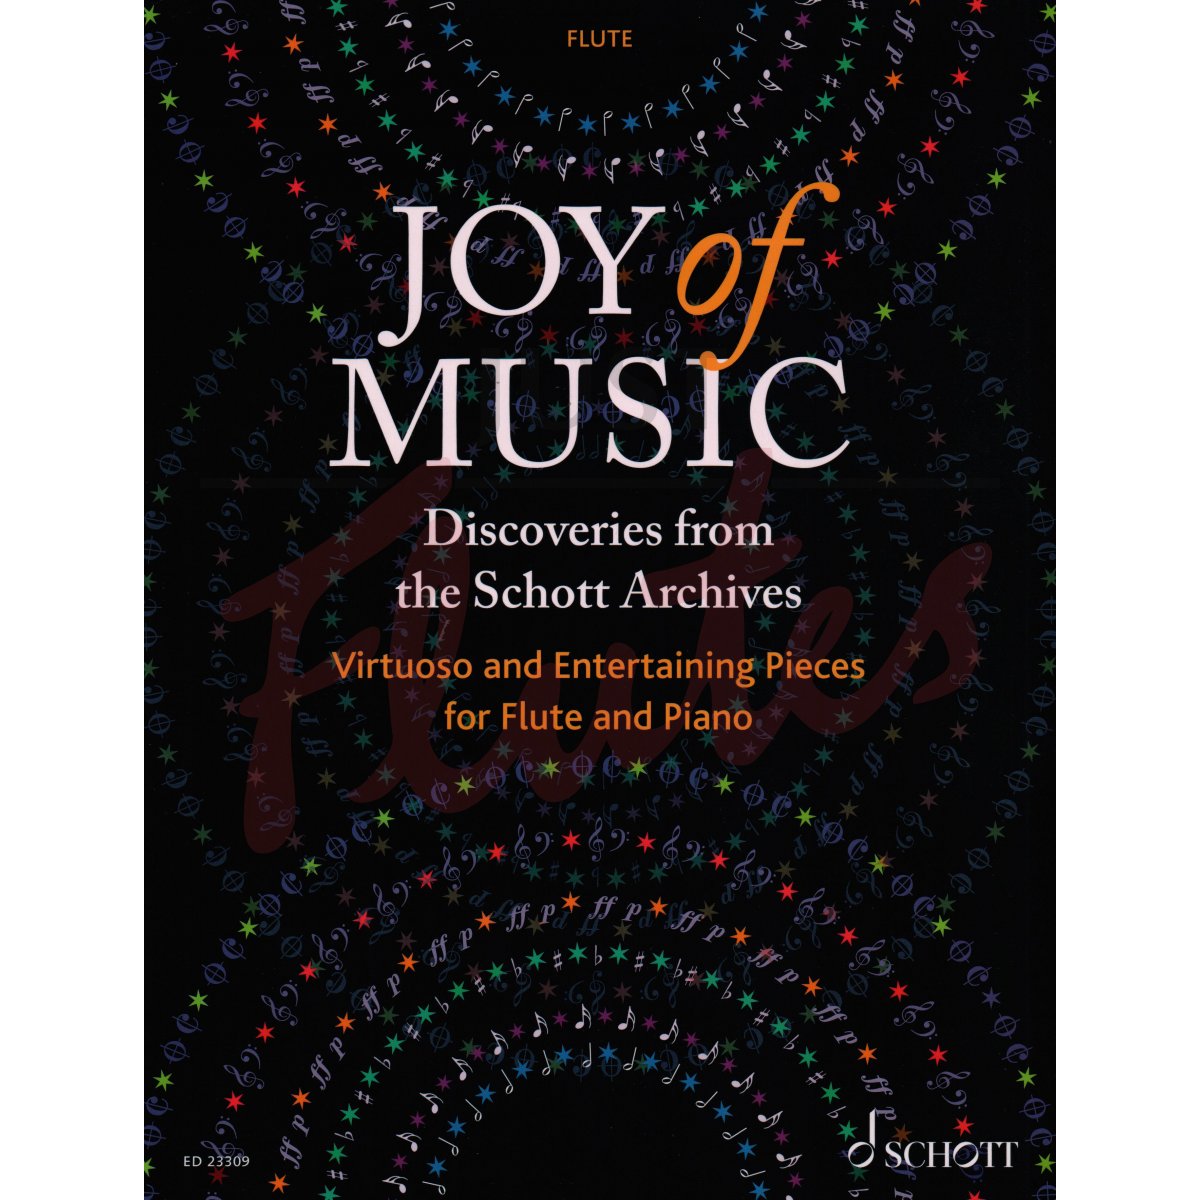 Joy of Music – Discoveries from the Schott Archives for Flute and Piano